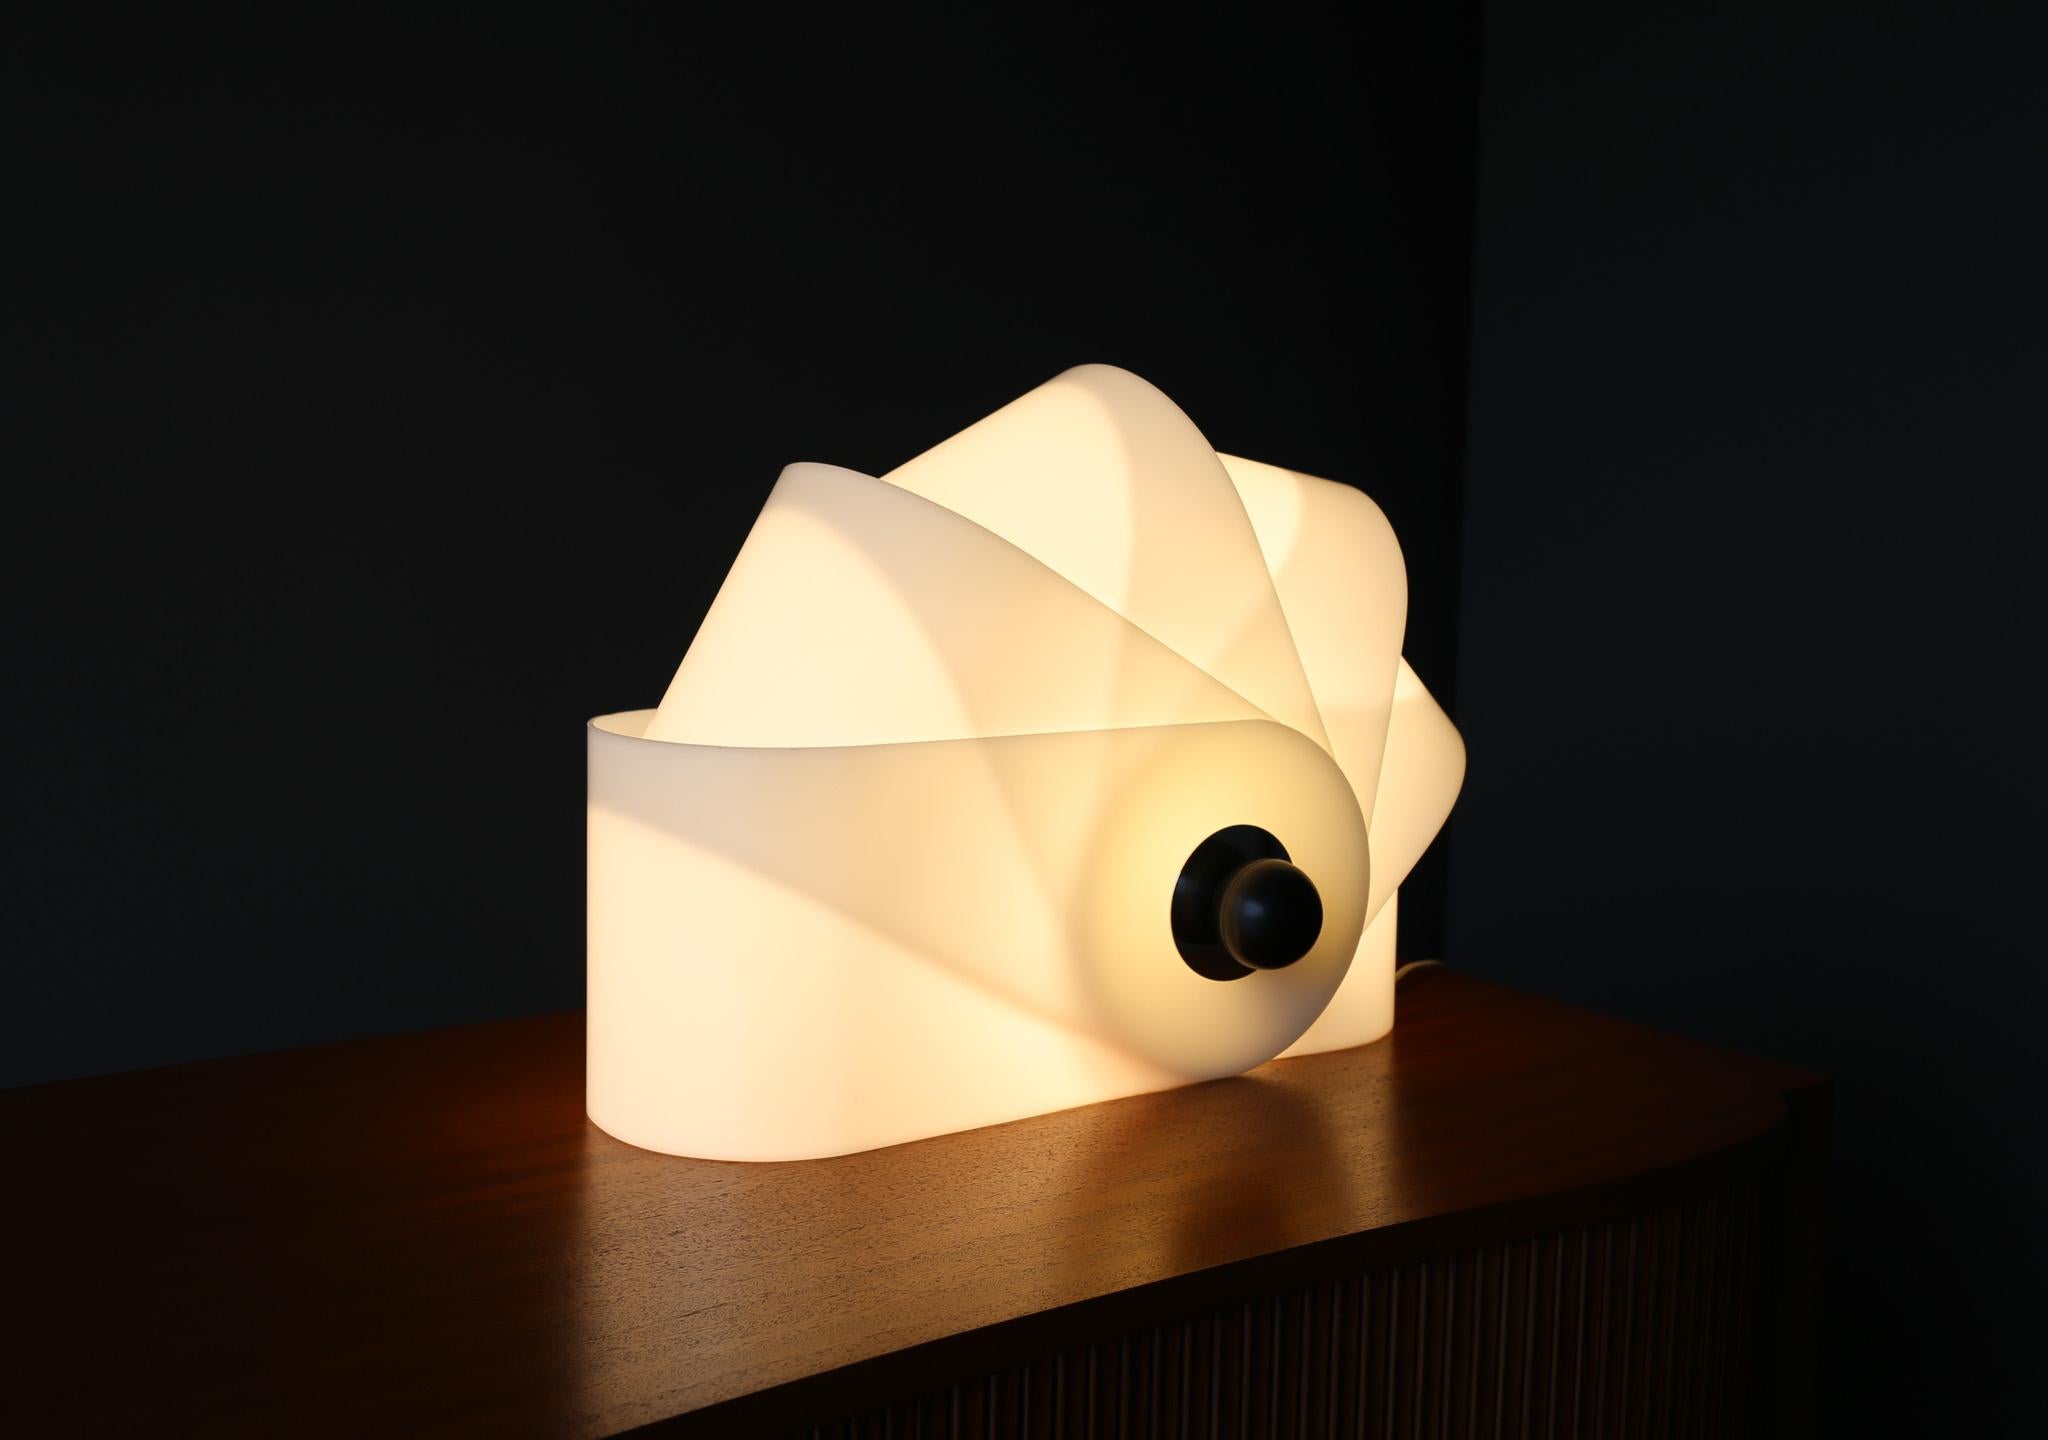 Superstudio Early Gherpe Table Lamp, Francesconi, Italy, c.1967 In Good Condition For Sale In San Juan Capistrano, CA